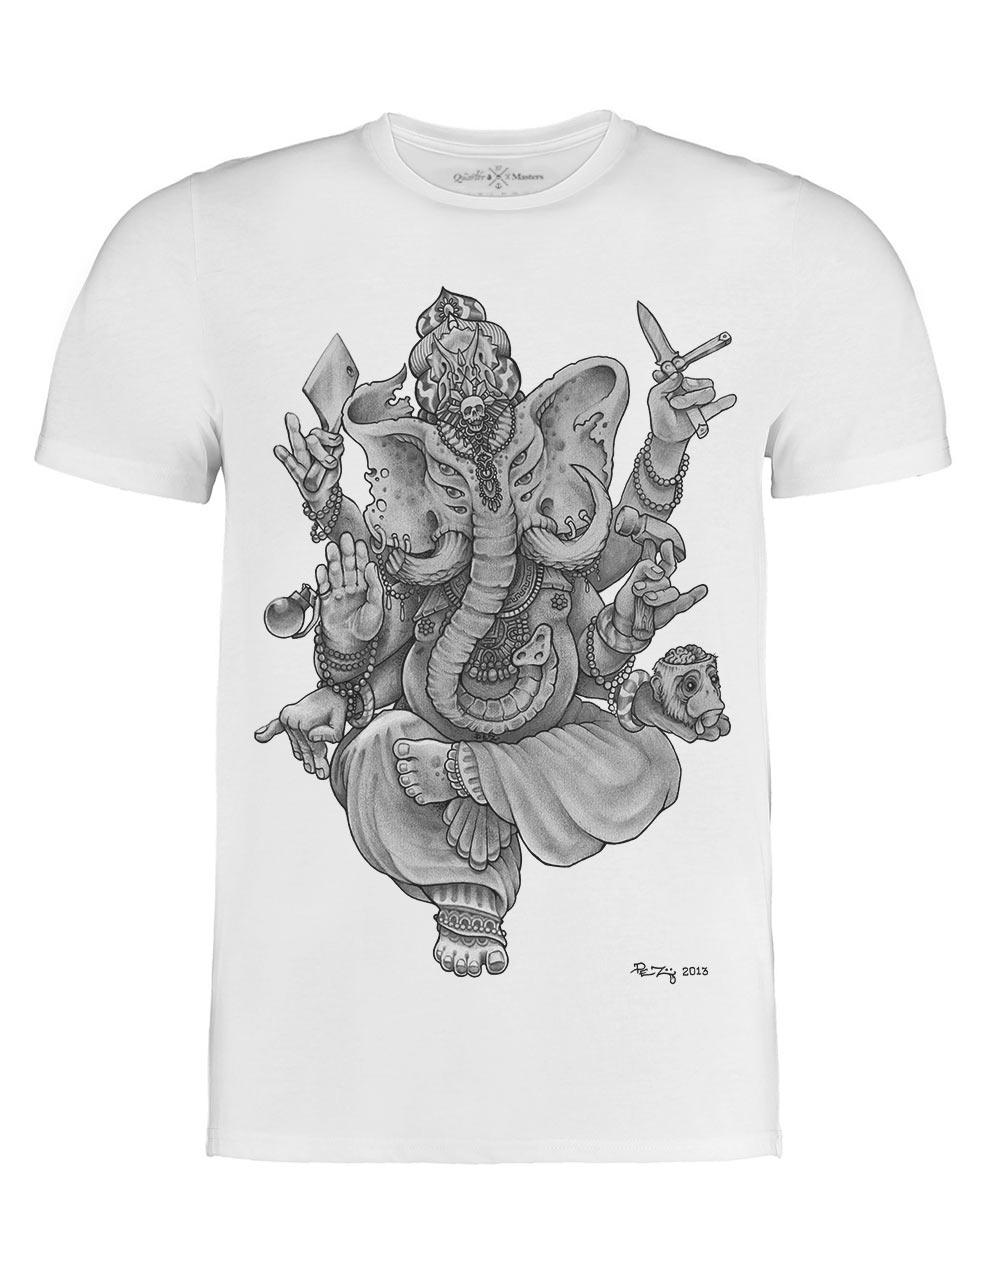 Ganesh T-shirt by Lewis Perry